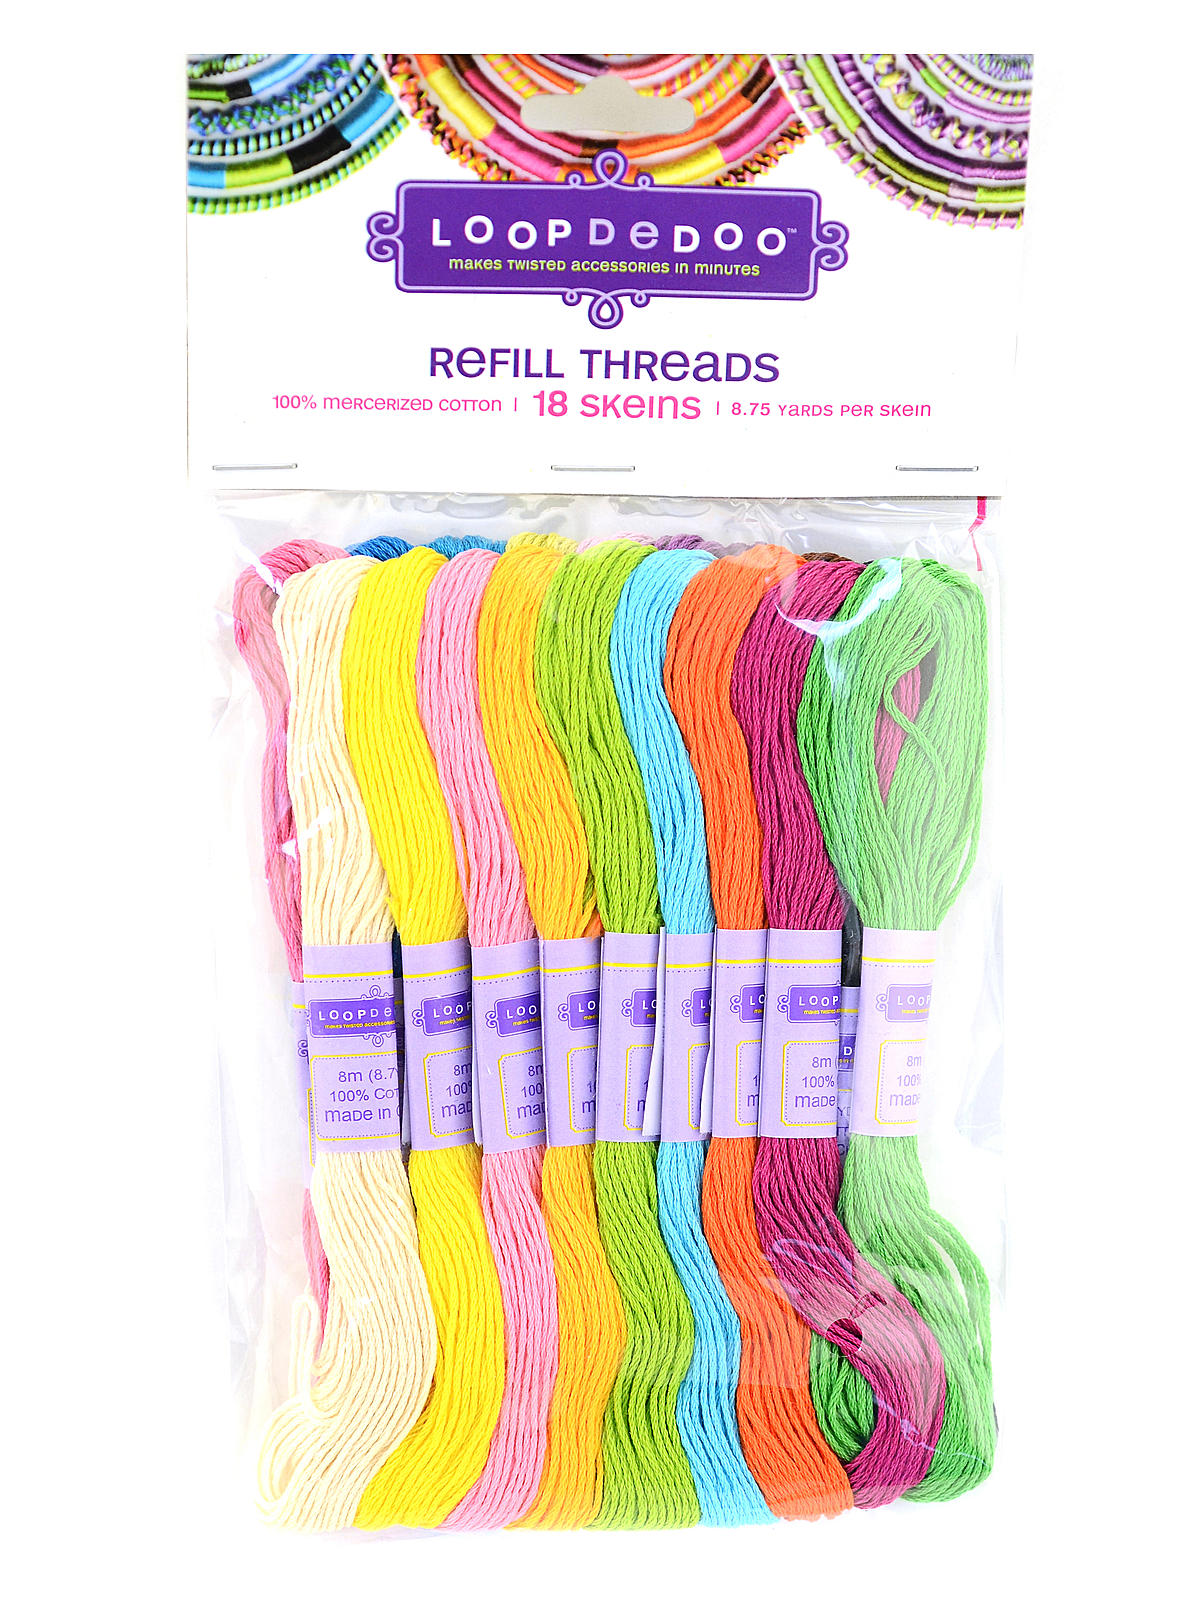 Loopdedoo Spinning Loom Refill Threads Pack Of 18 Skeins